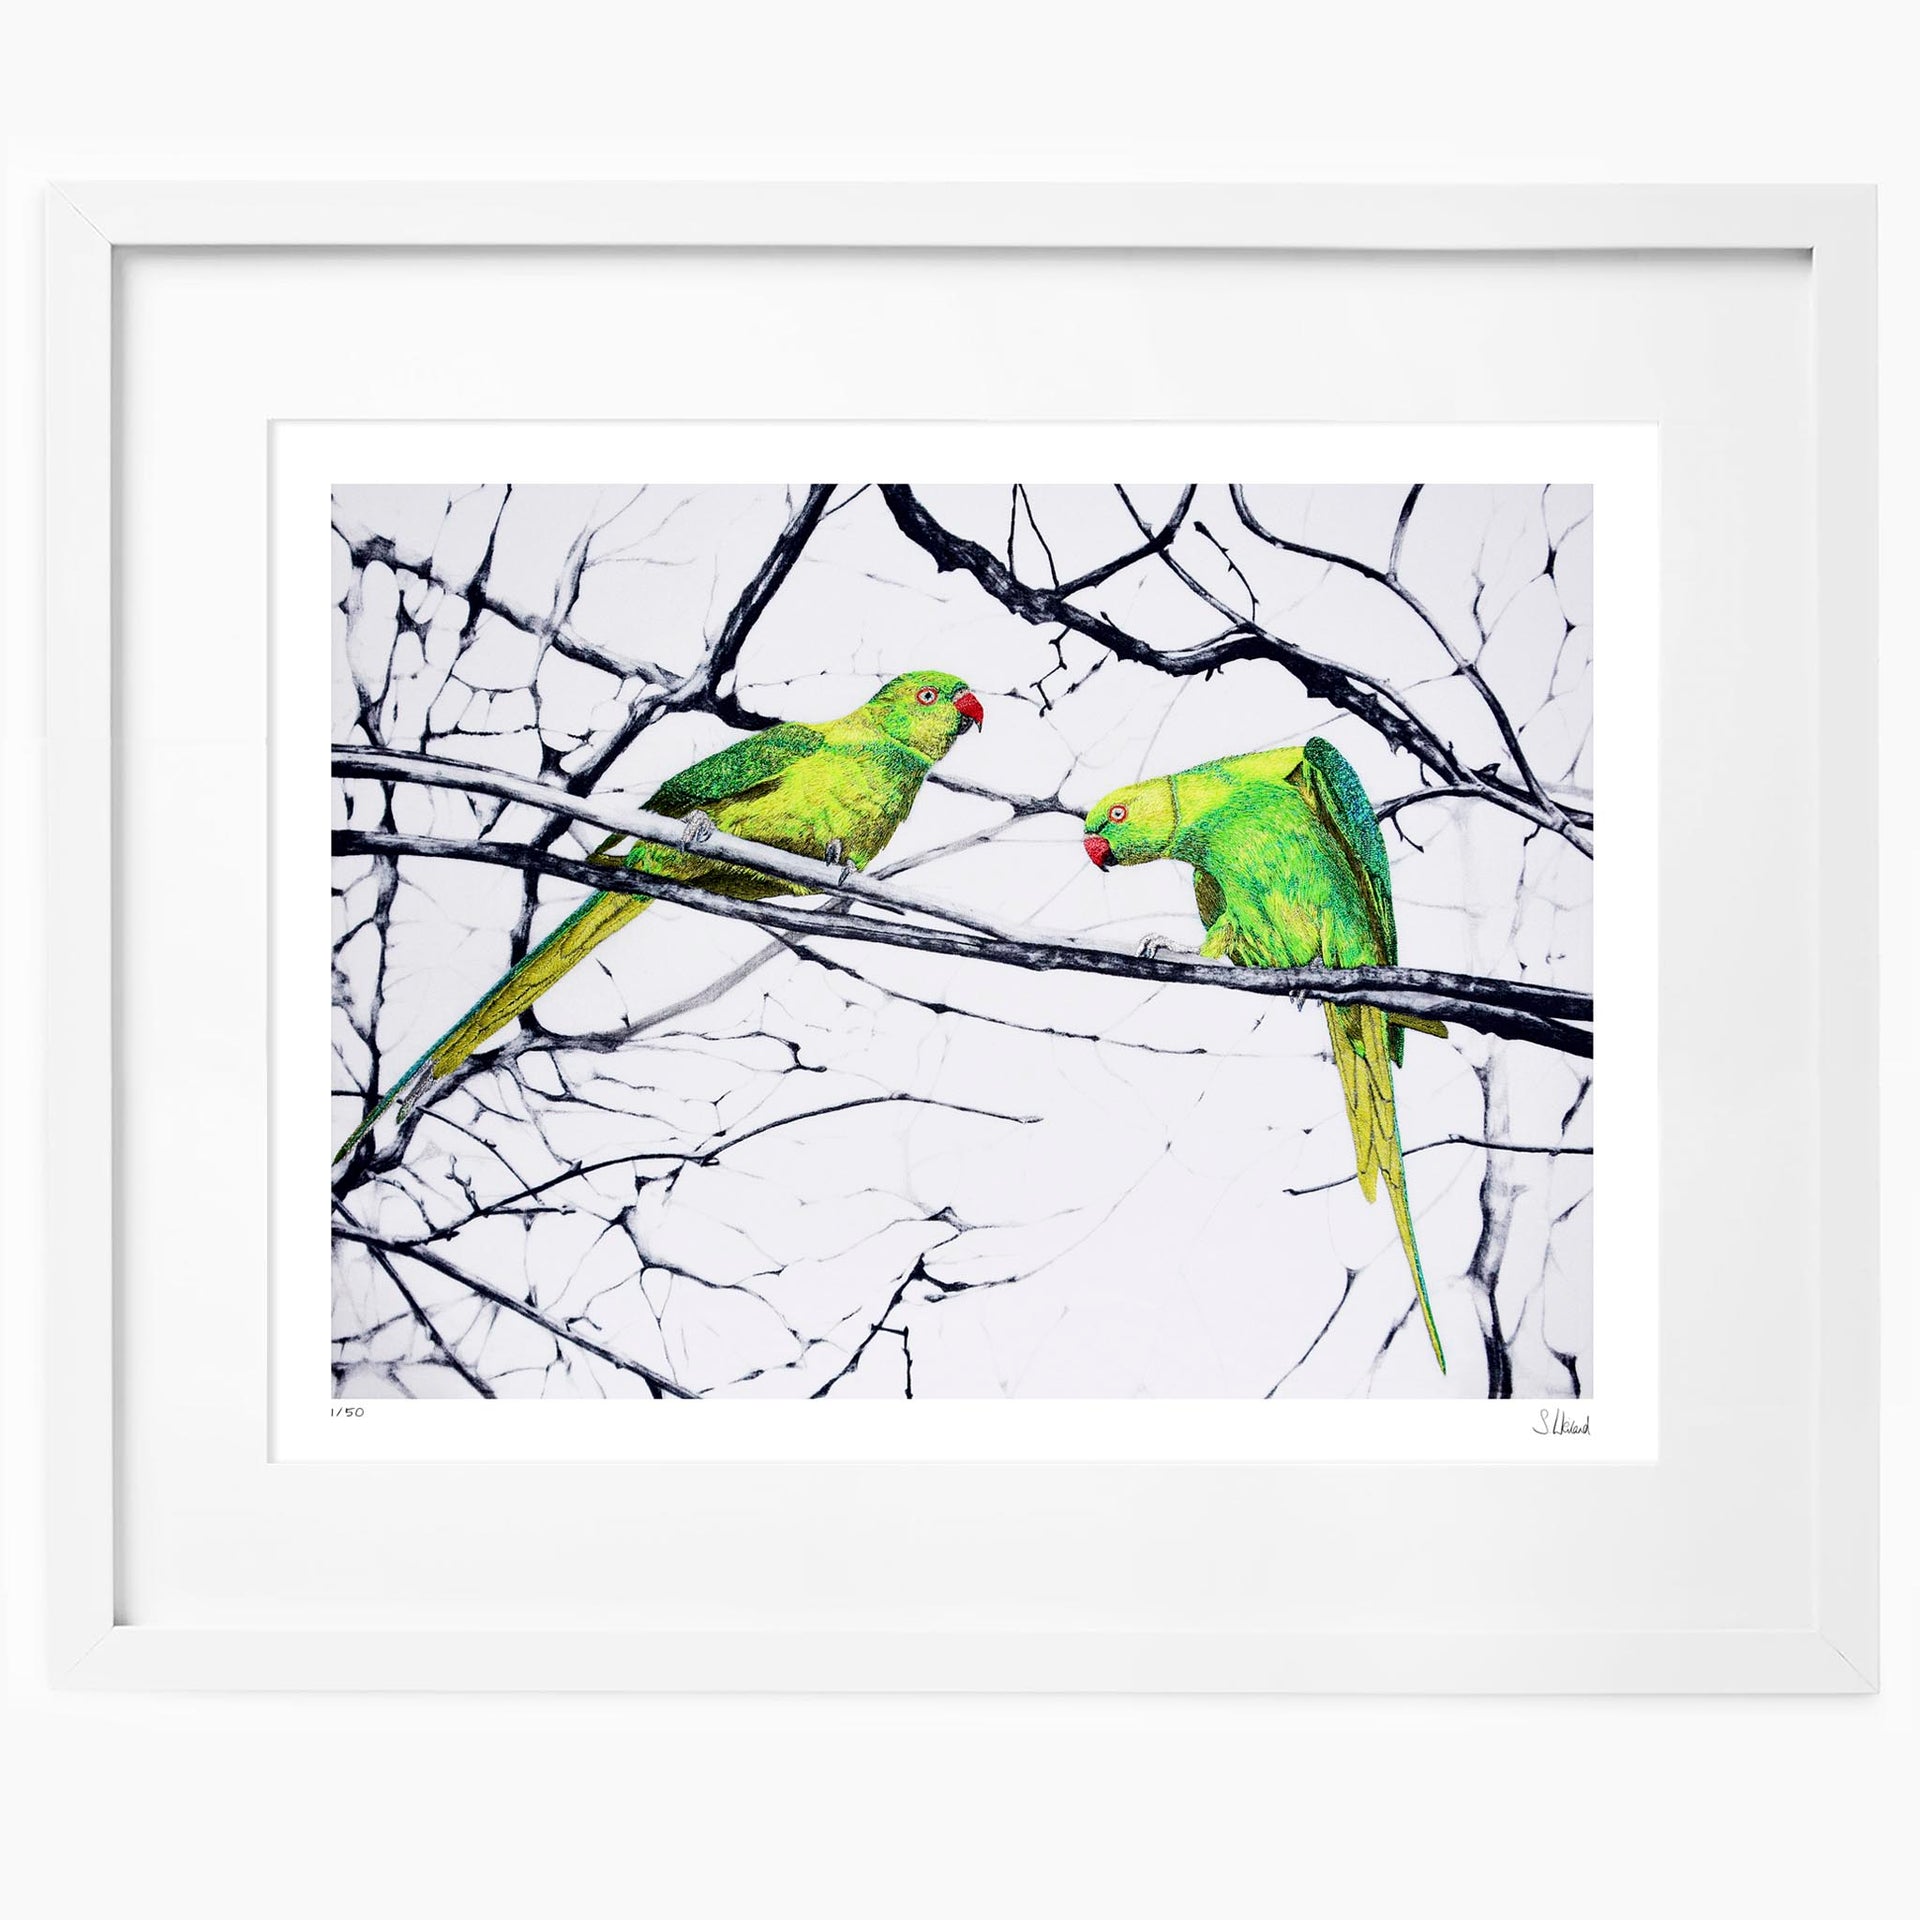 Hand embroidered hyde park parakeets limited edition print in white frame